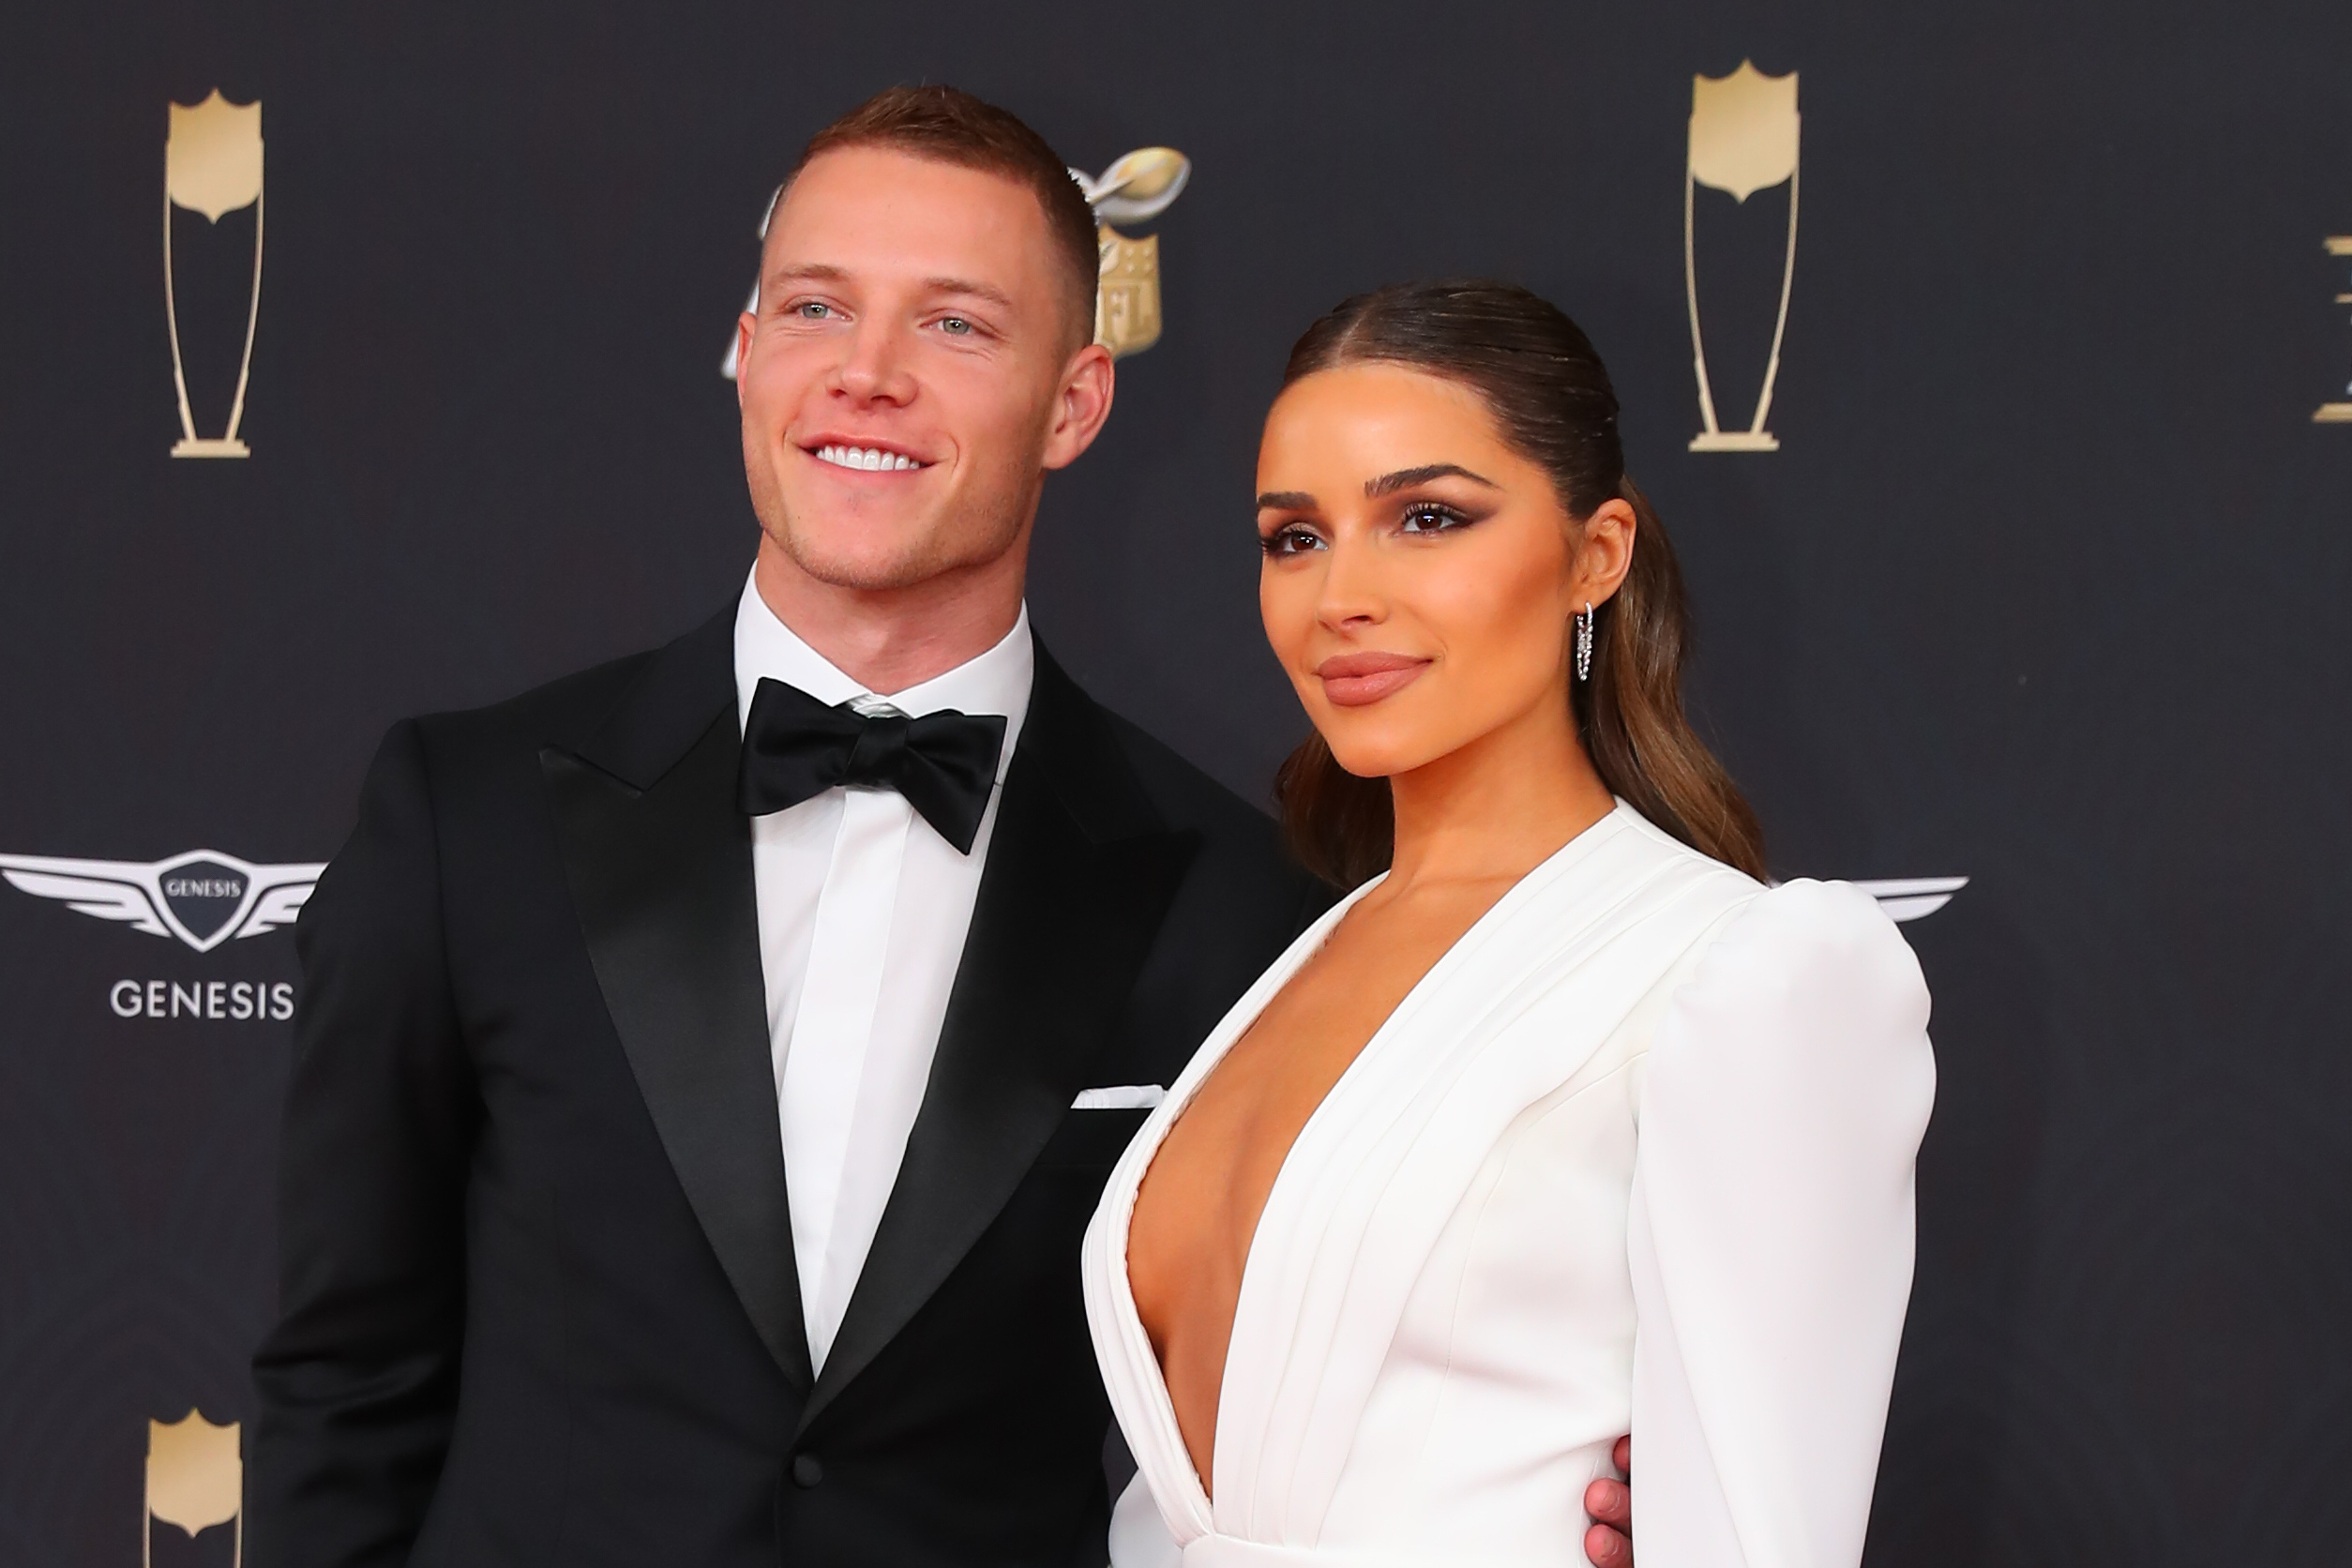 Christian McCaffrey’s Girlfriend Revealed as 2020 Sports Illustrated Swimsuit Cover Girl